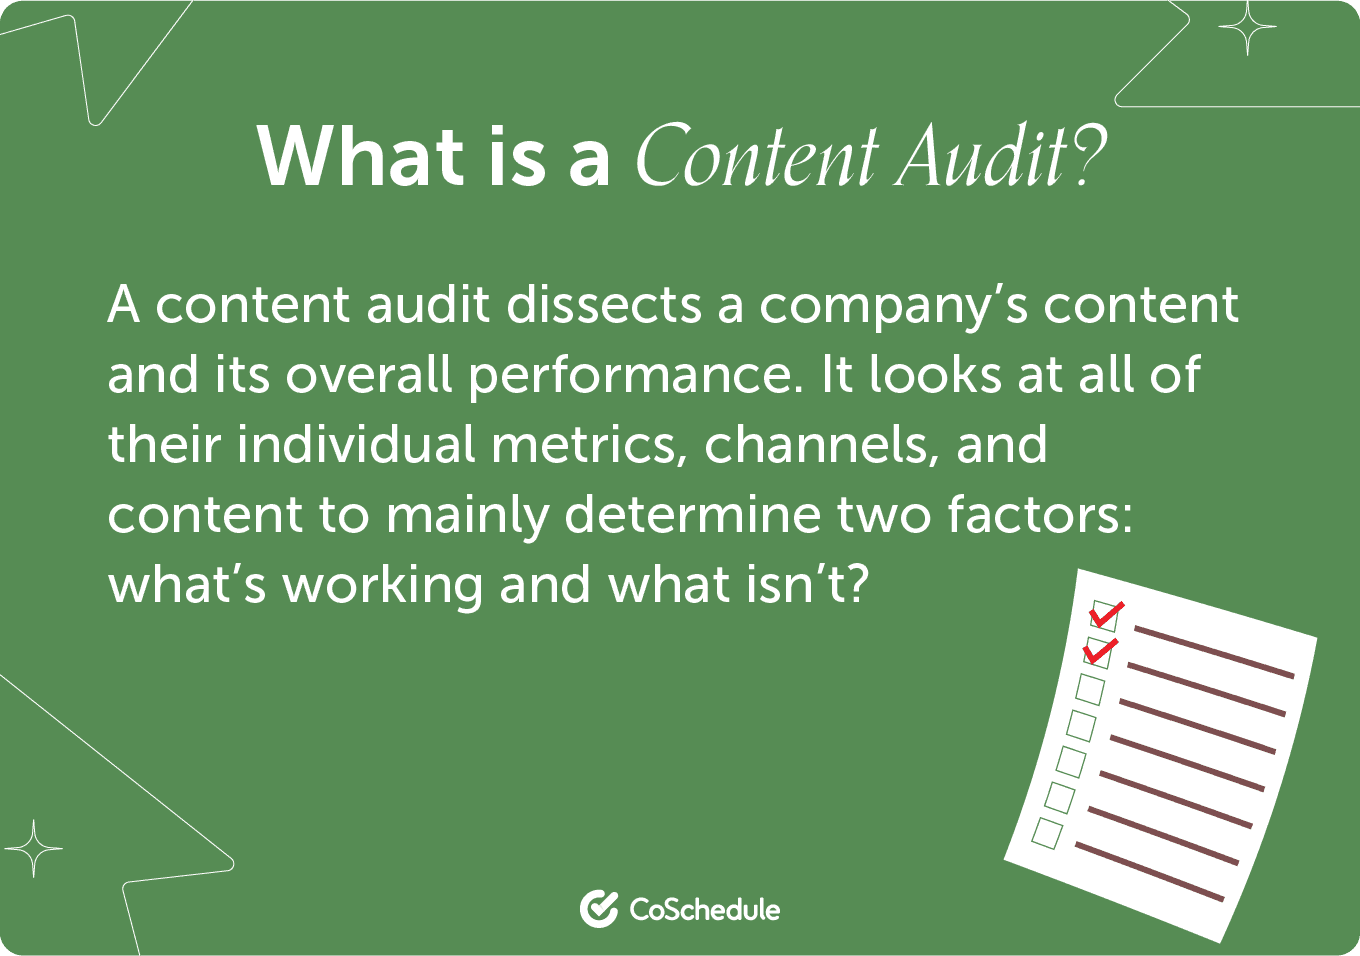 Defining a content audit - a process of dissecting a company's content and overall performance.